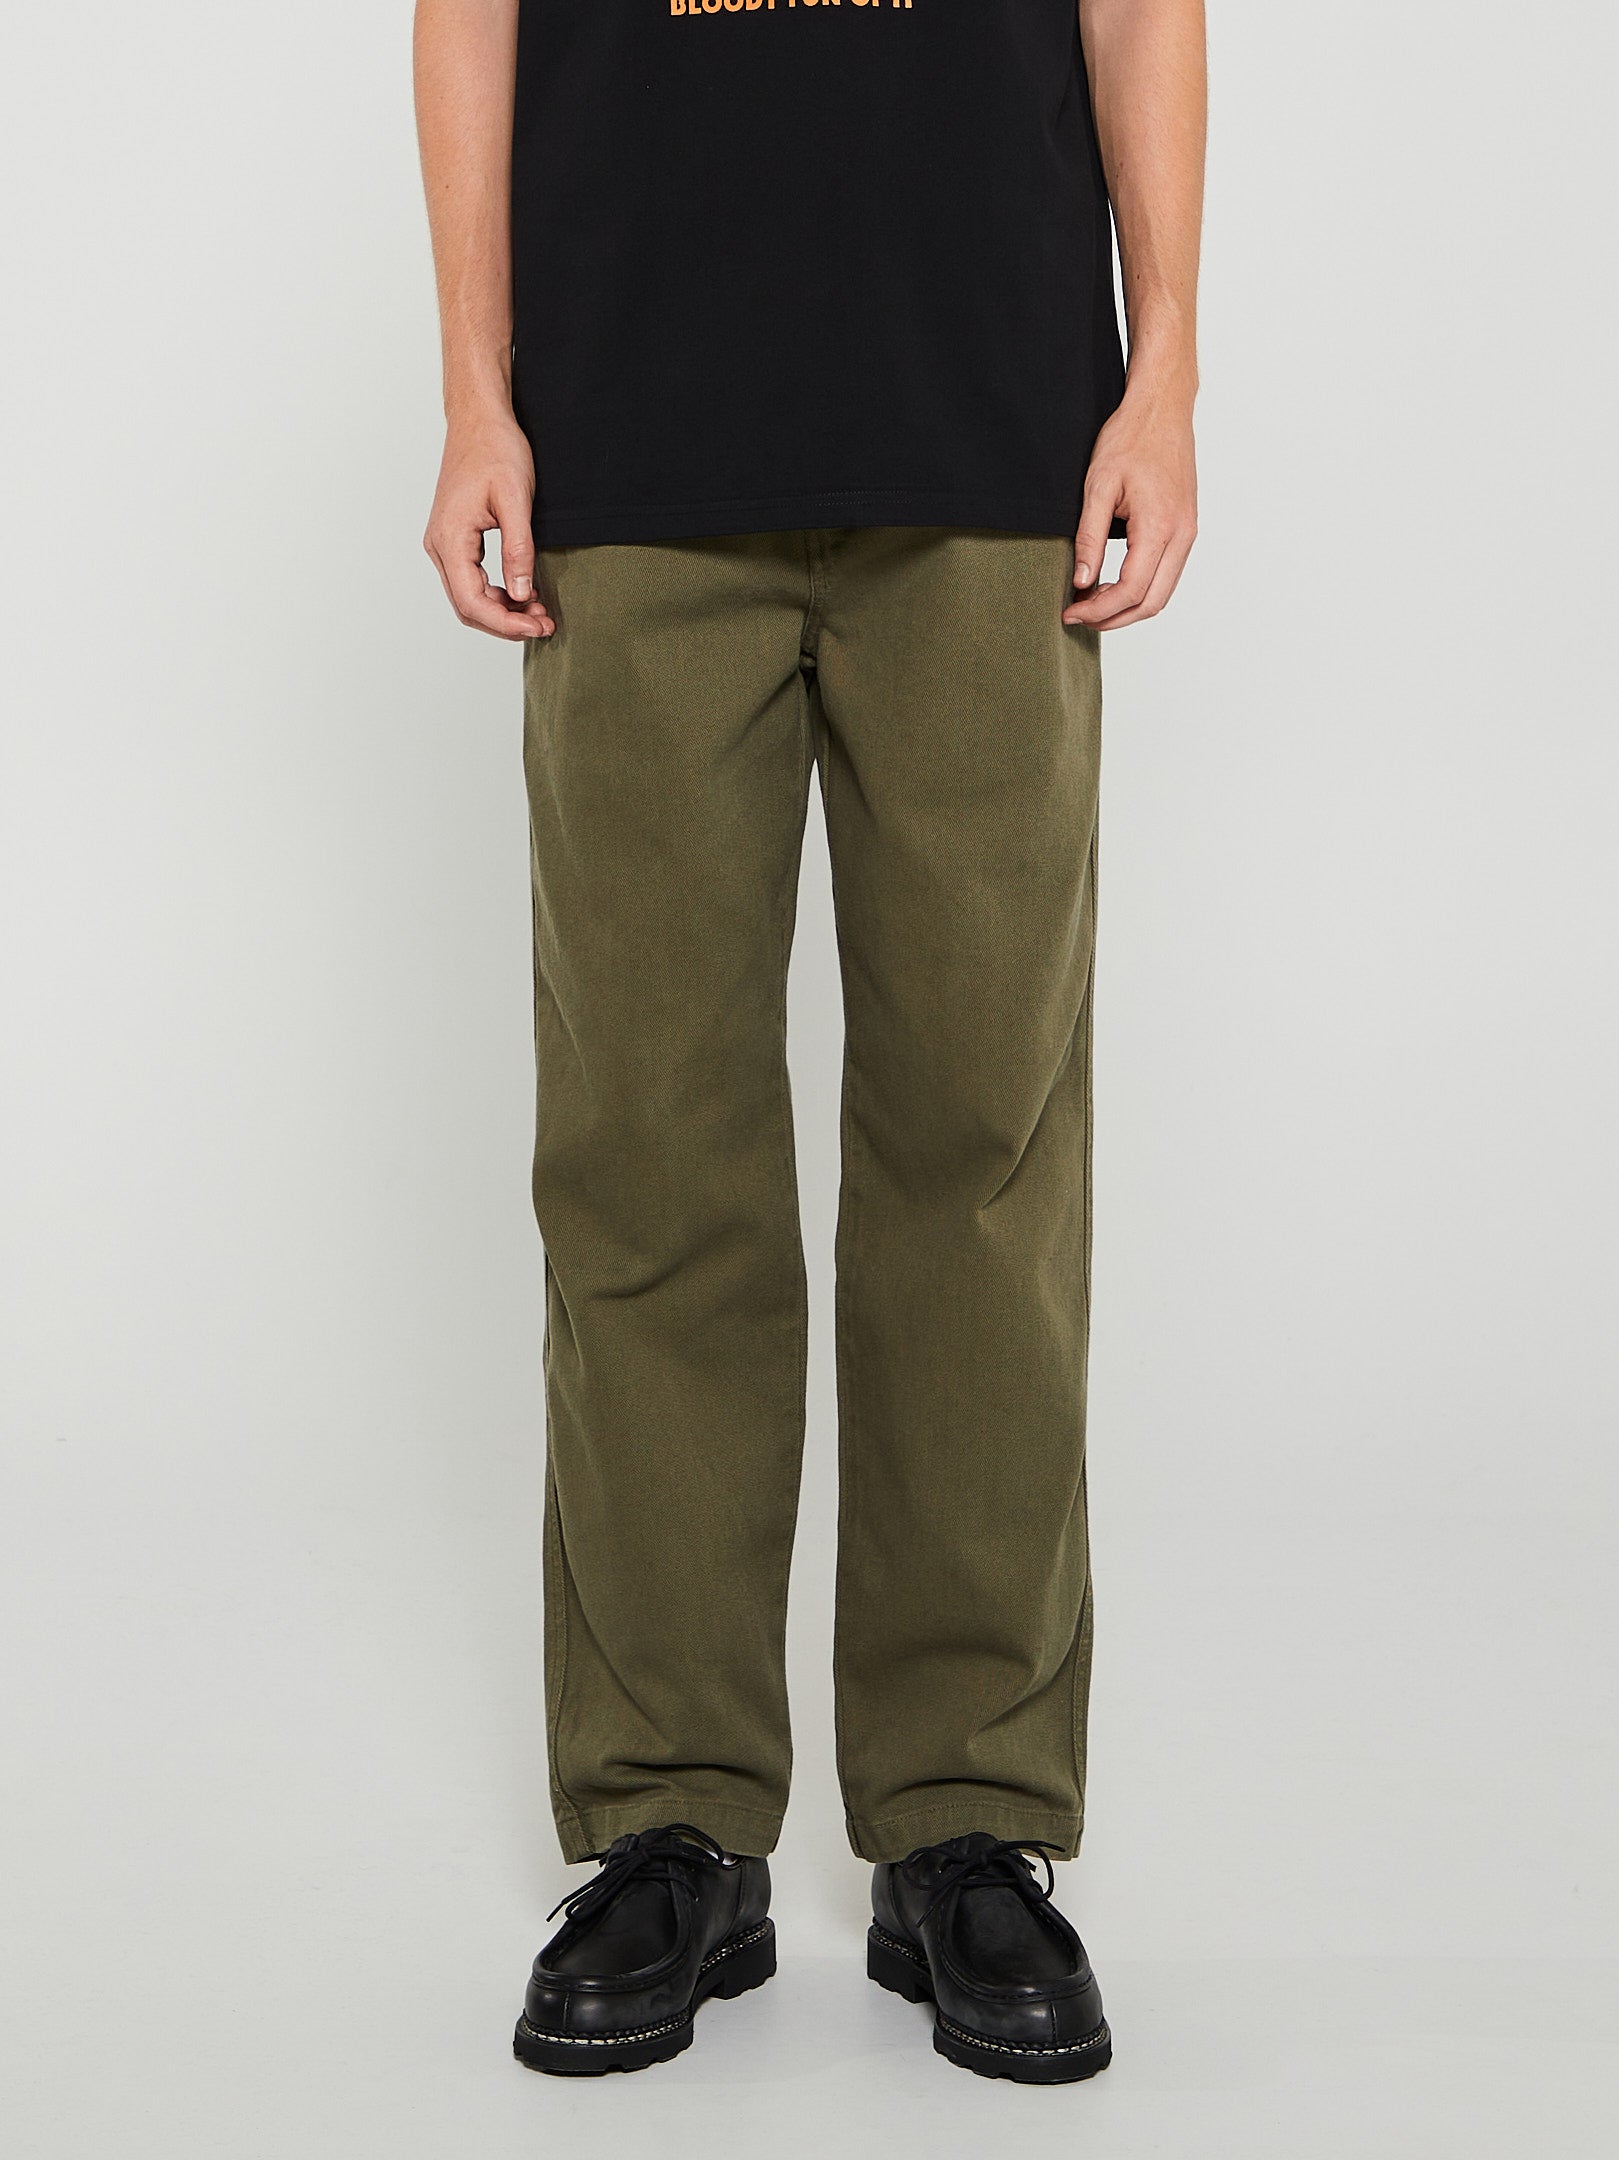 Another Aspect - Pants 2.0 in Green